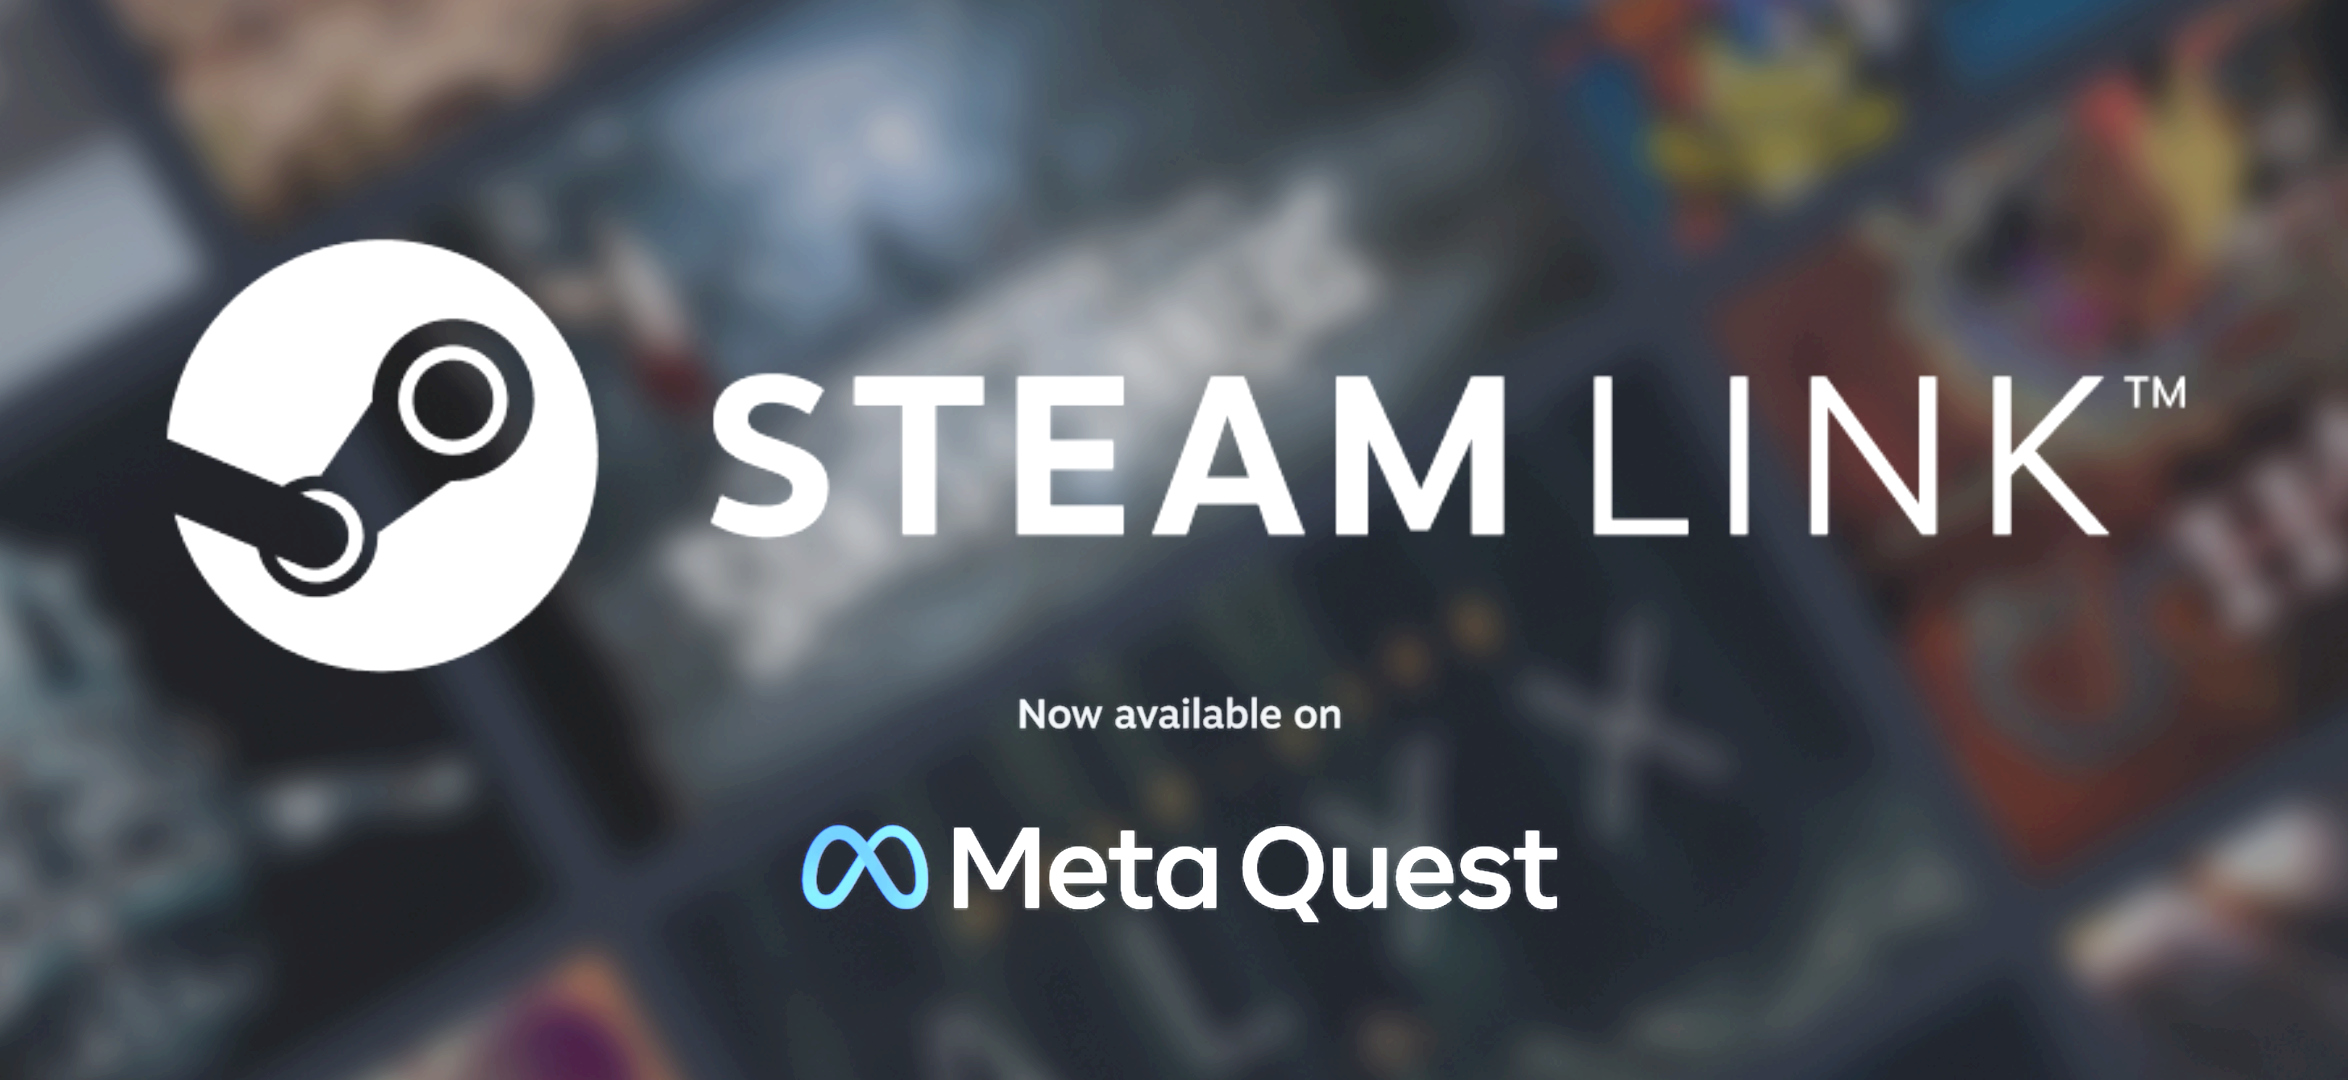 Official Valve Steam Link arrives on Meta Quest for Steam VR wireless gaming